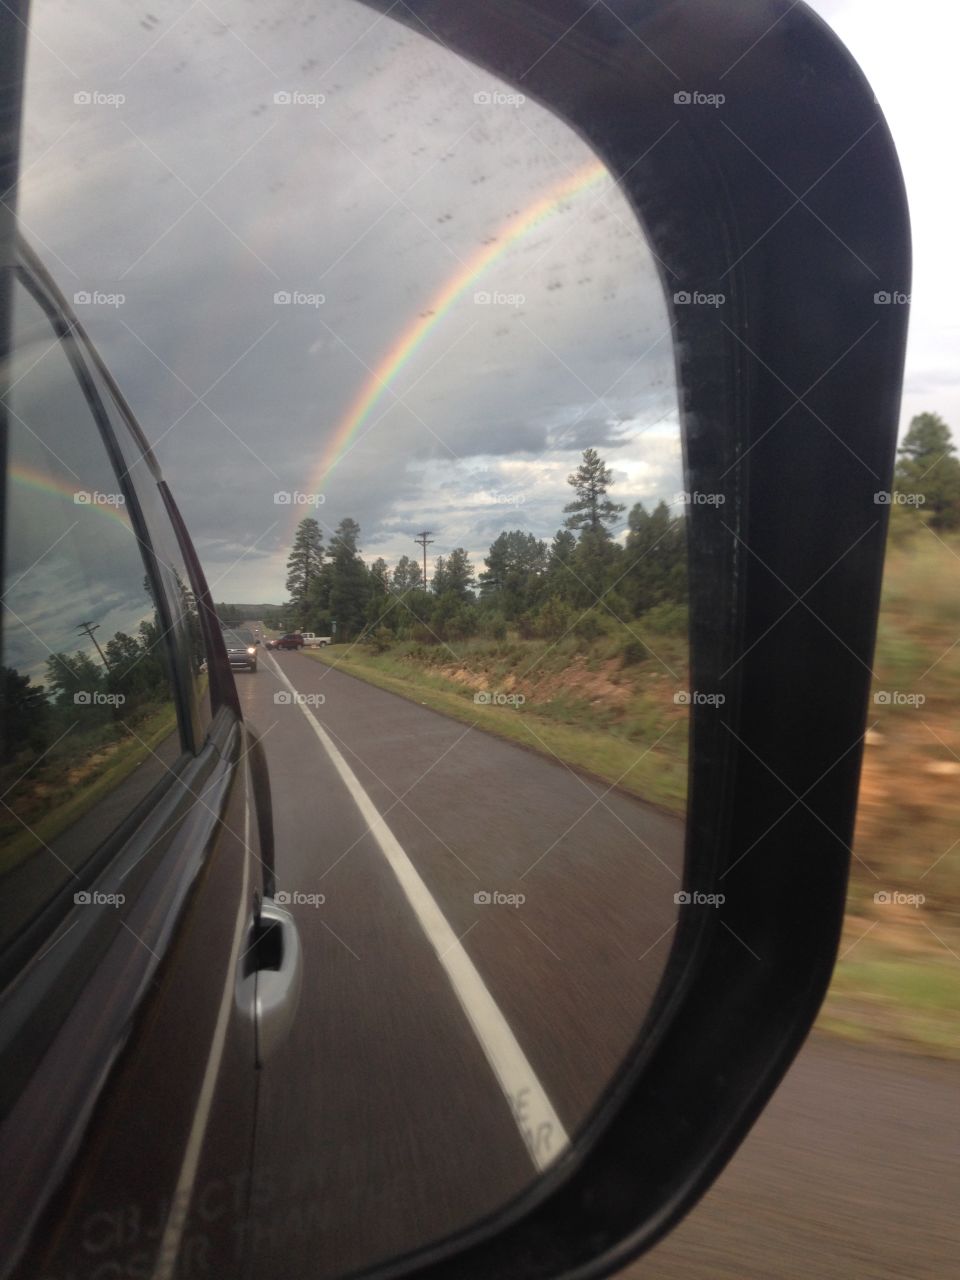 Rainbow in the rear view . In the rear view mirror. Heber az